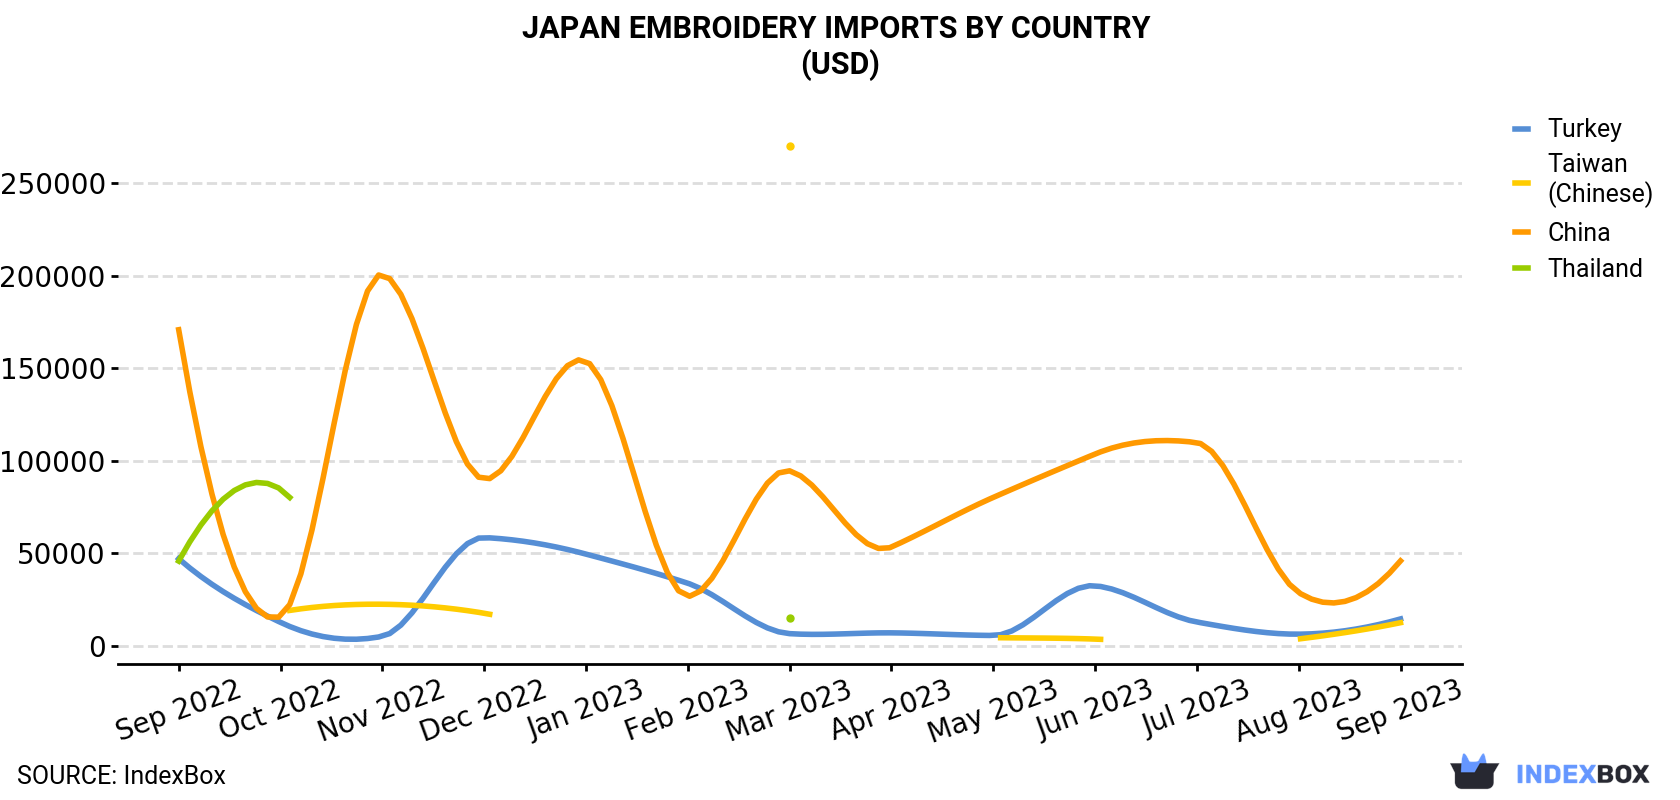 Japan Embroidery Imports By Country (USD)